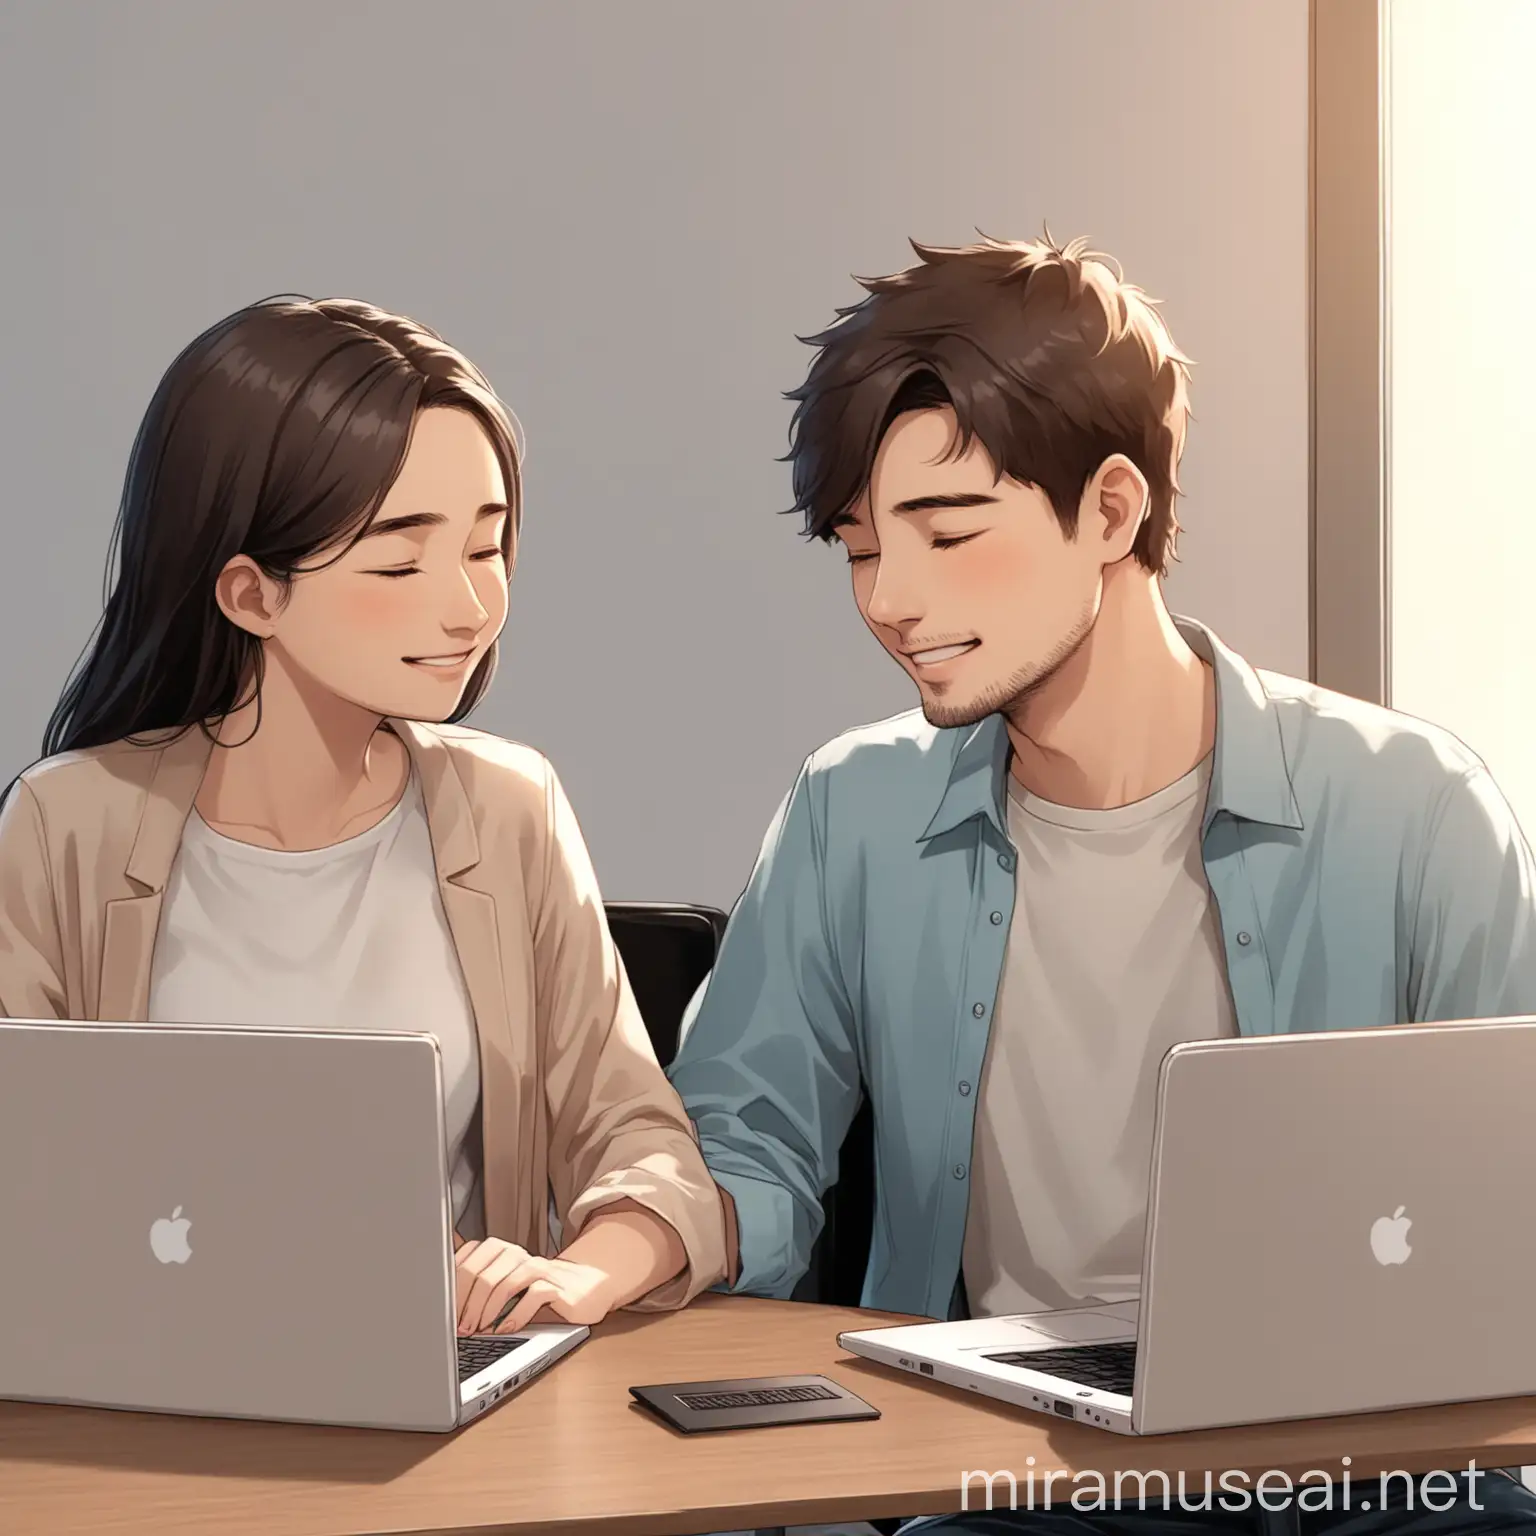 couple doing their own office work on different laptops and sharing a cute moment together , only two people strictly